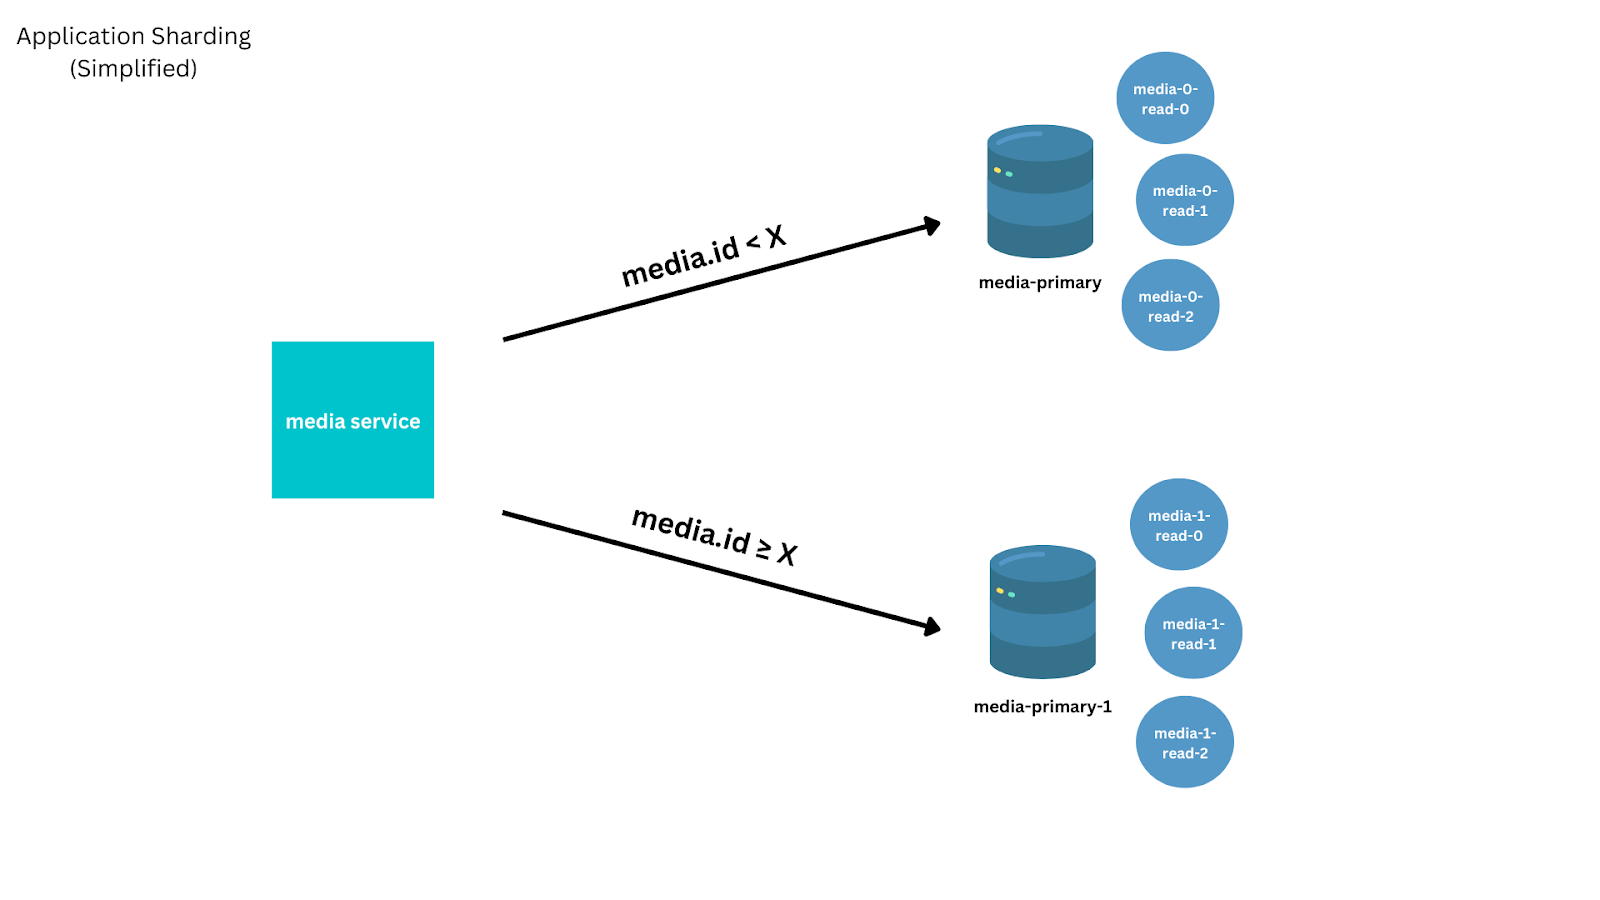 Simplified diagram of application sharding. Media IDs less than x goes to the media.primary database, while media IDs greater than or equal to x goes to the media.primary-1 database.